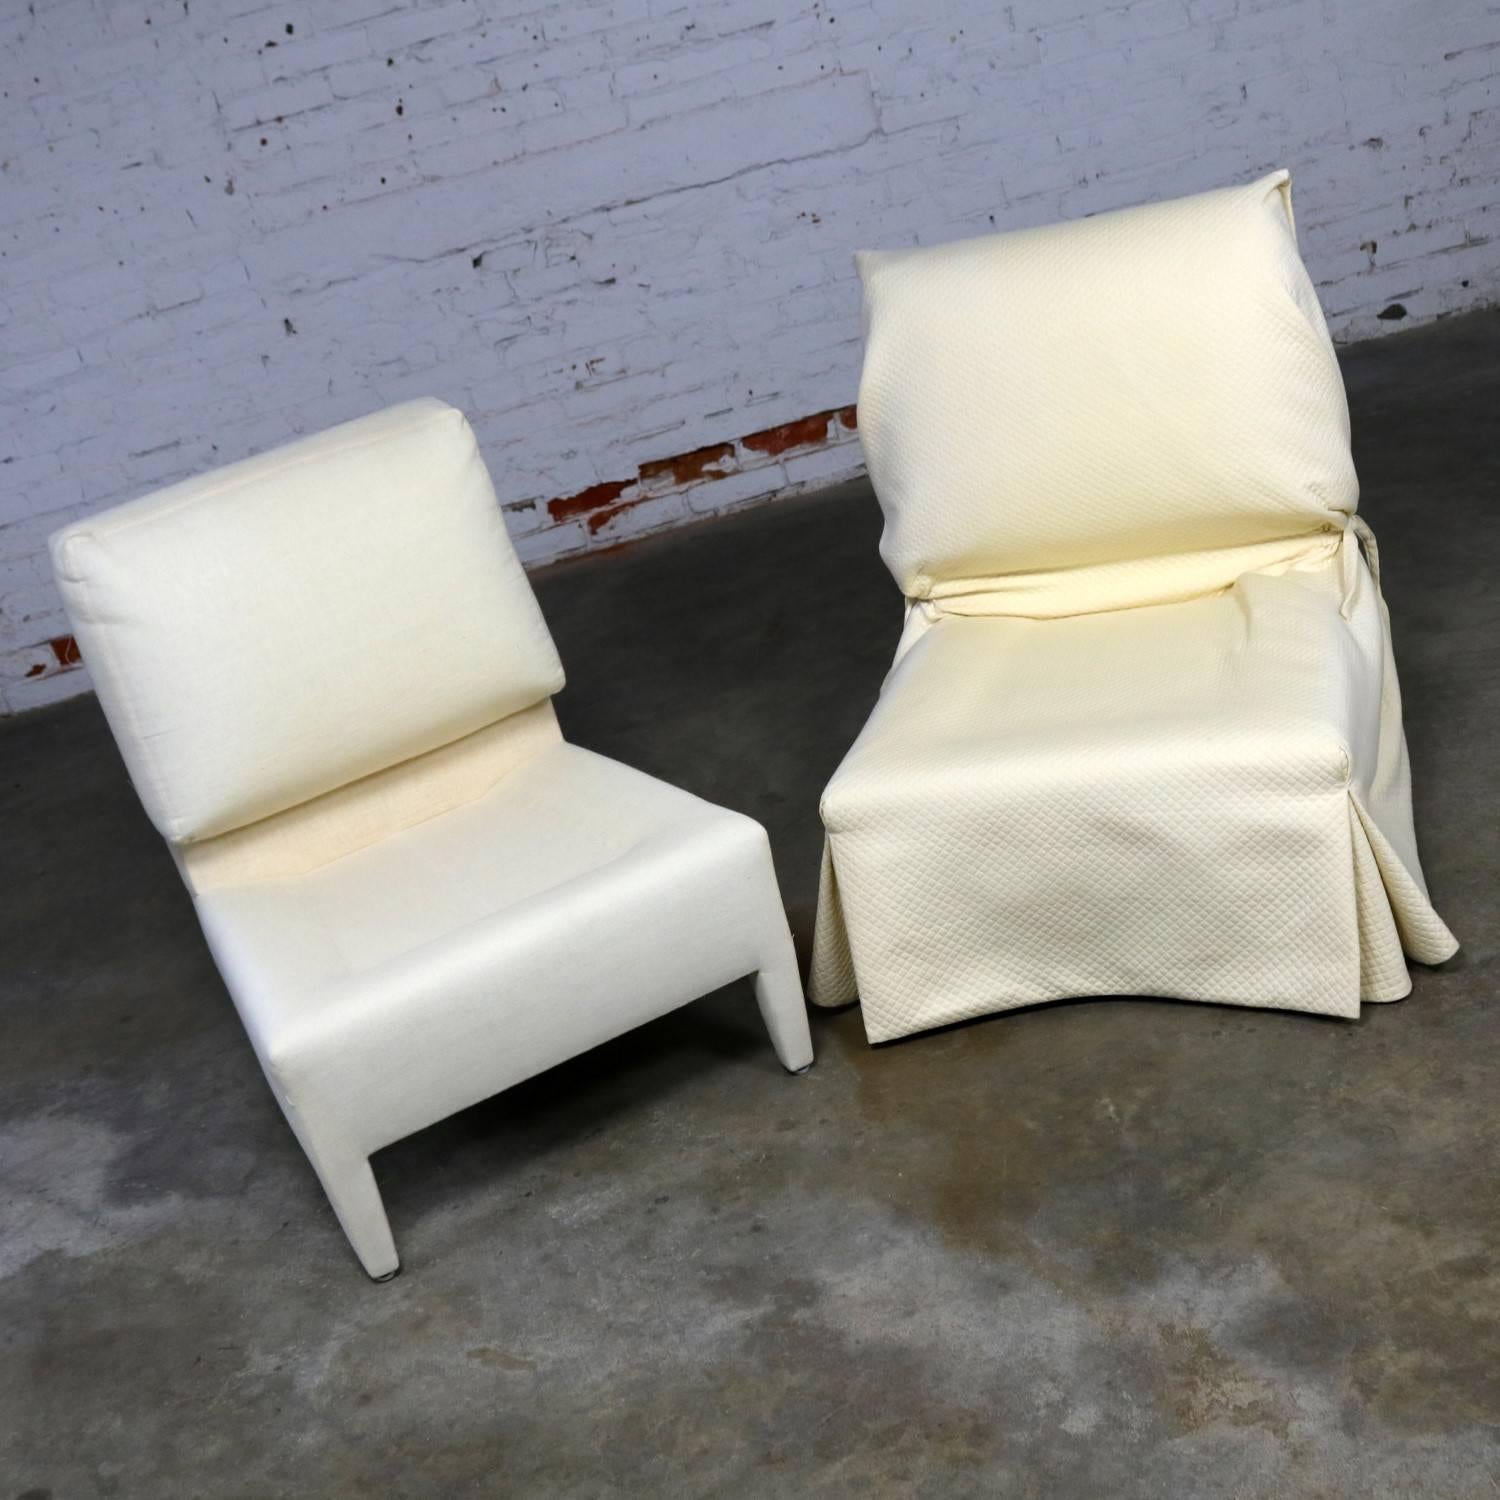 Fabric Donghia Slipper Chair by Angelo Donghia, One Slipcovered One Not